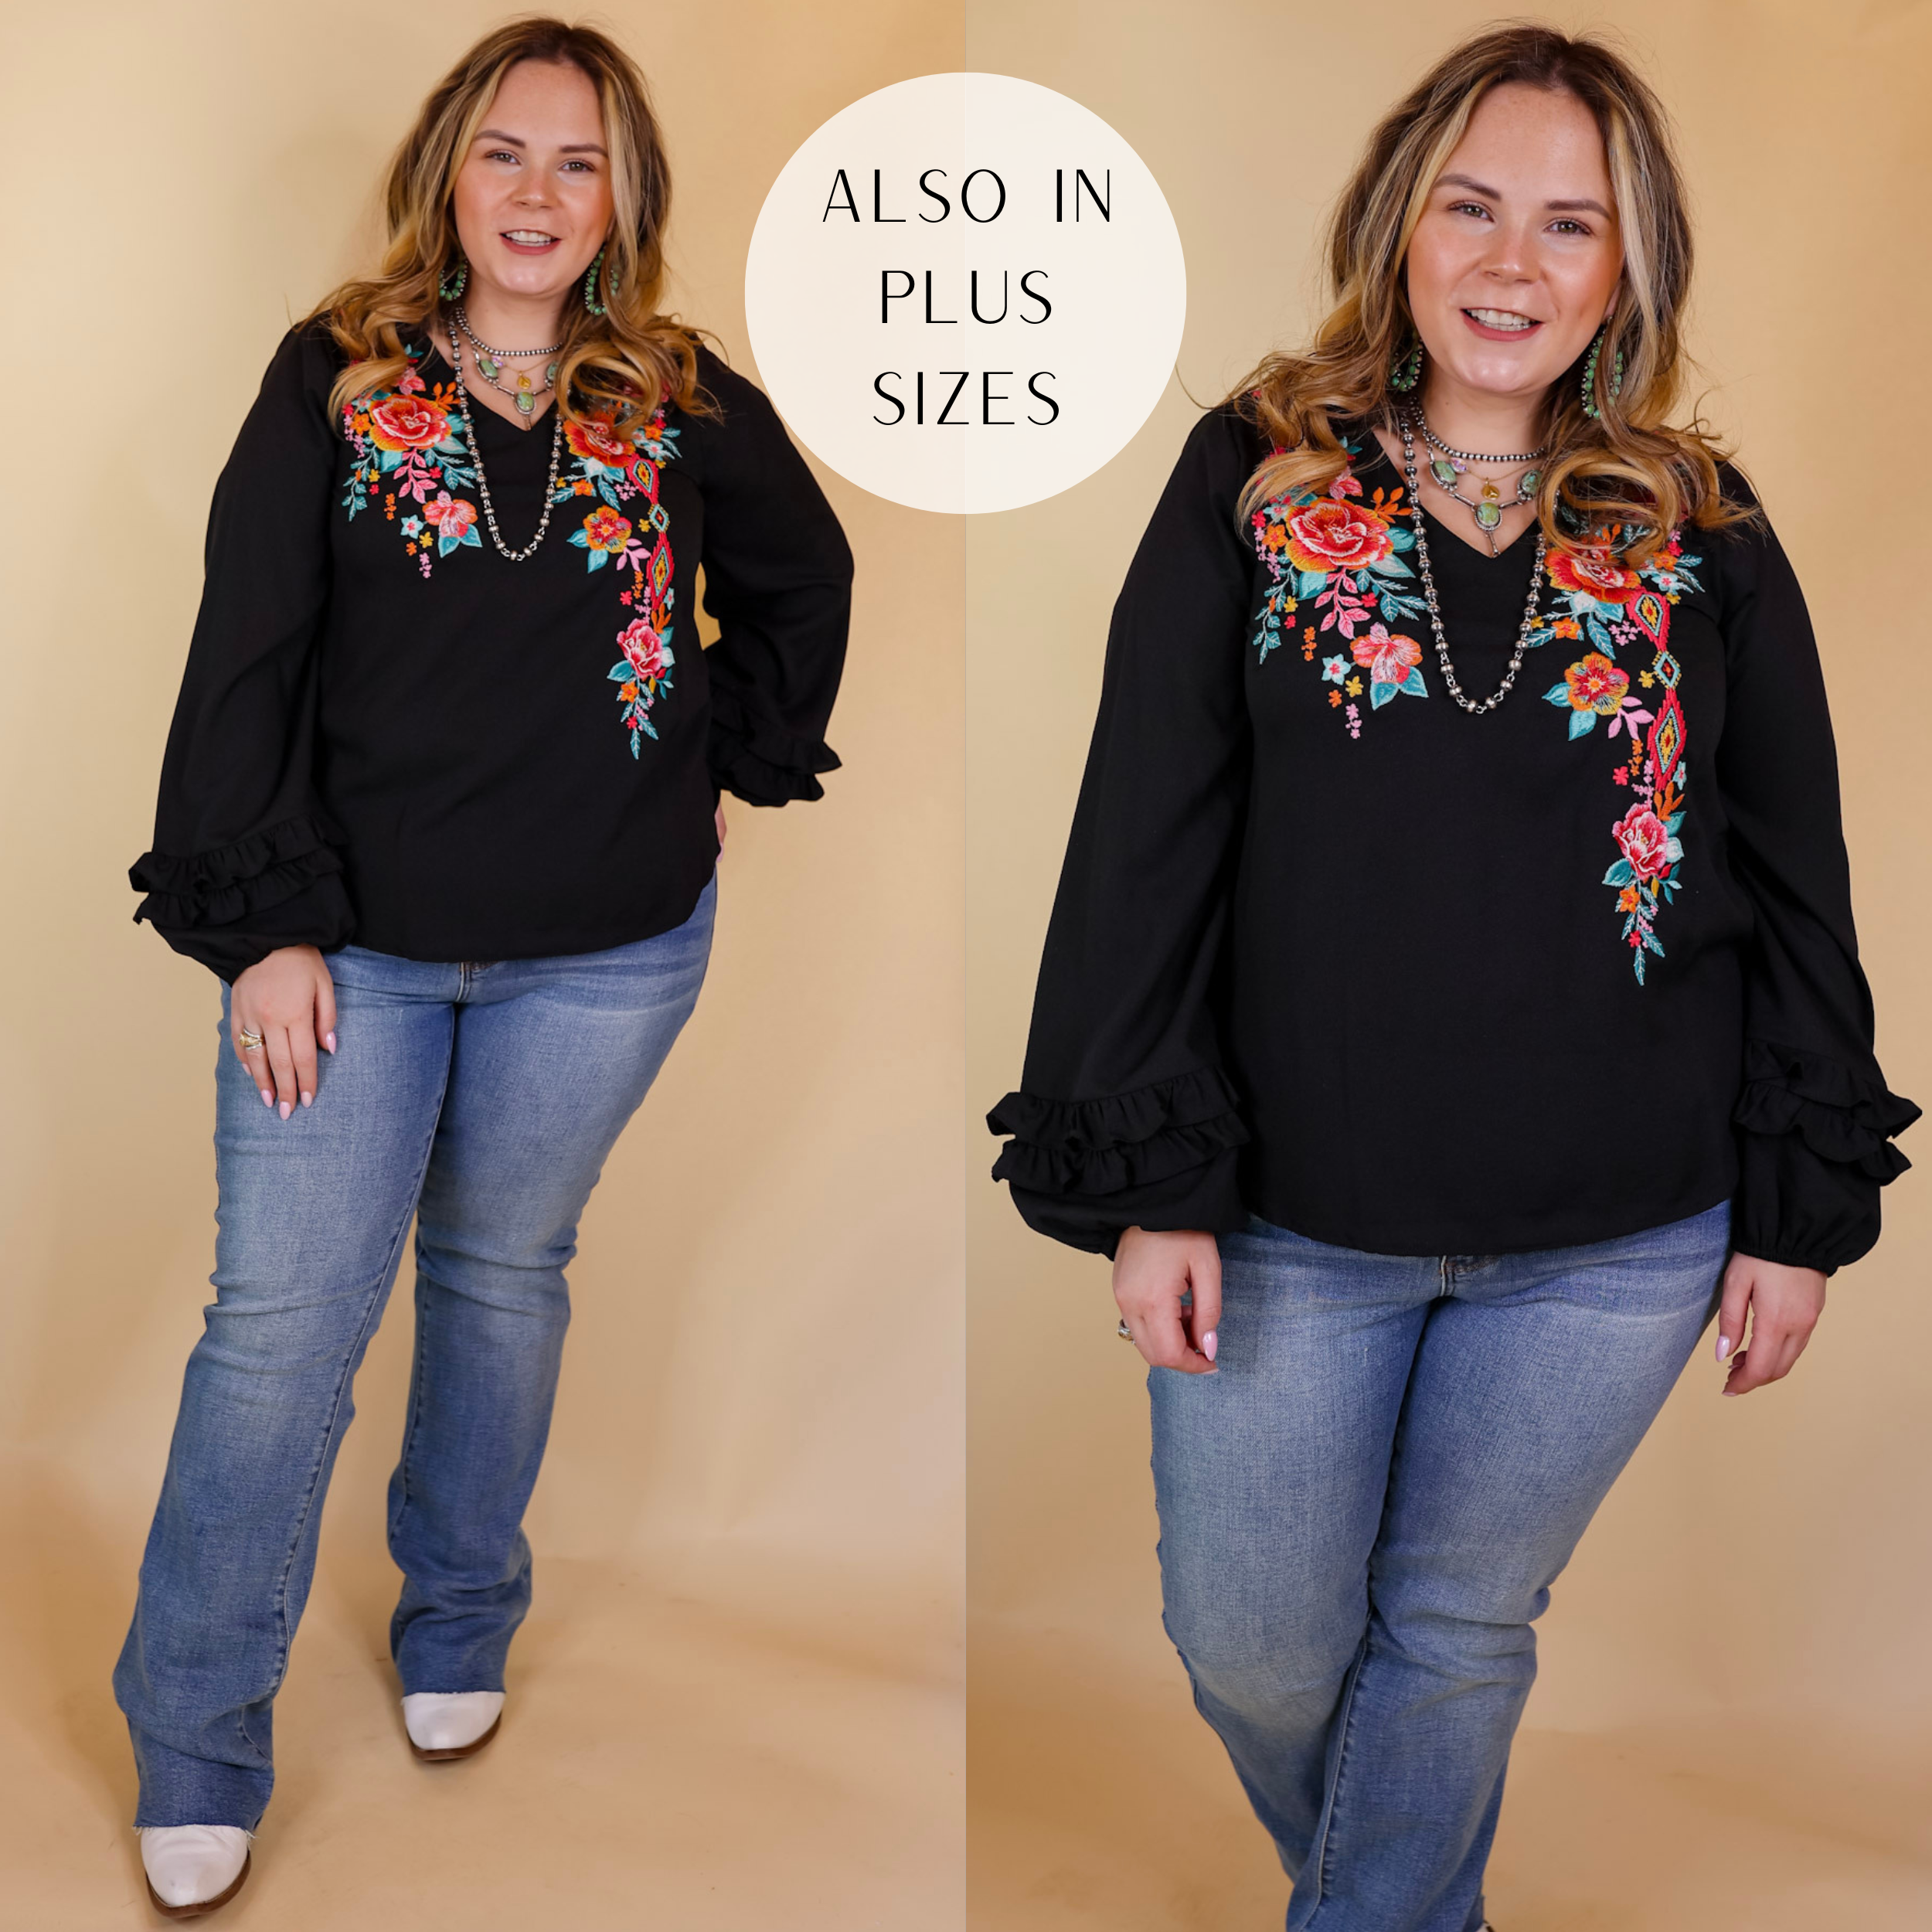 Model is wearing a long sleeve floral embroidered top with long sleeves that ruffle at the wrist in black. Model has this top paired jeans, boots, and Navajo jewelry. Background is solid tan. 